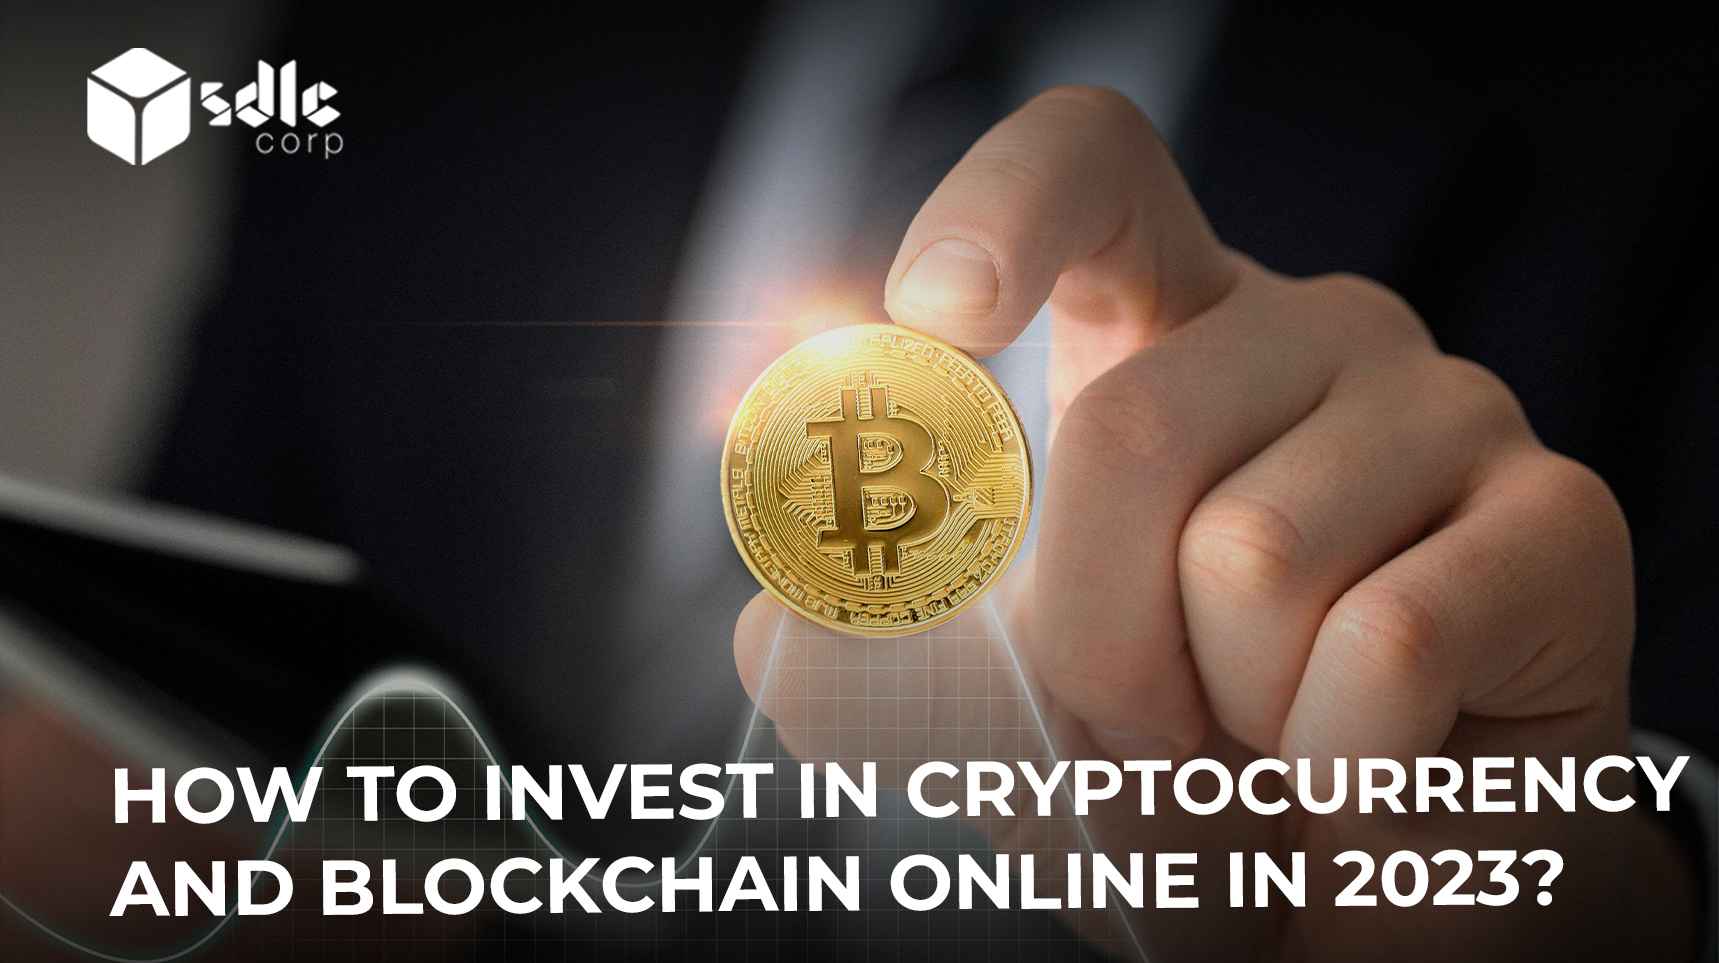 How to Invest in Cryptocurrency and Blockchain Online in 2023?